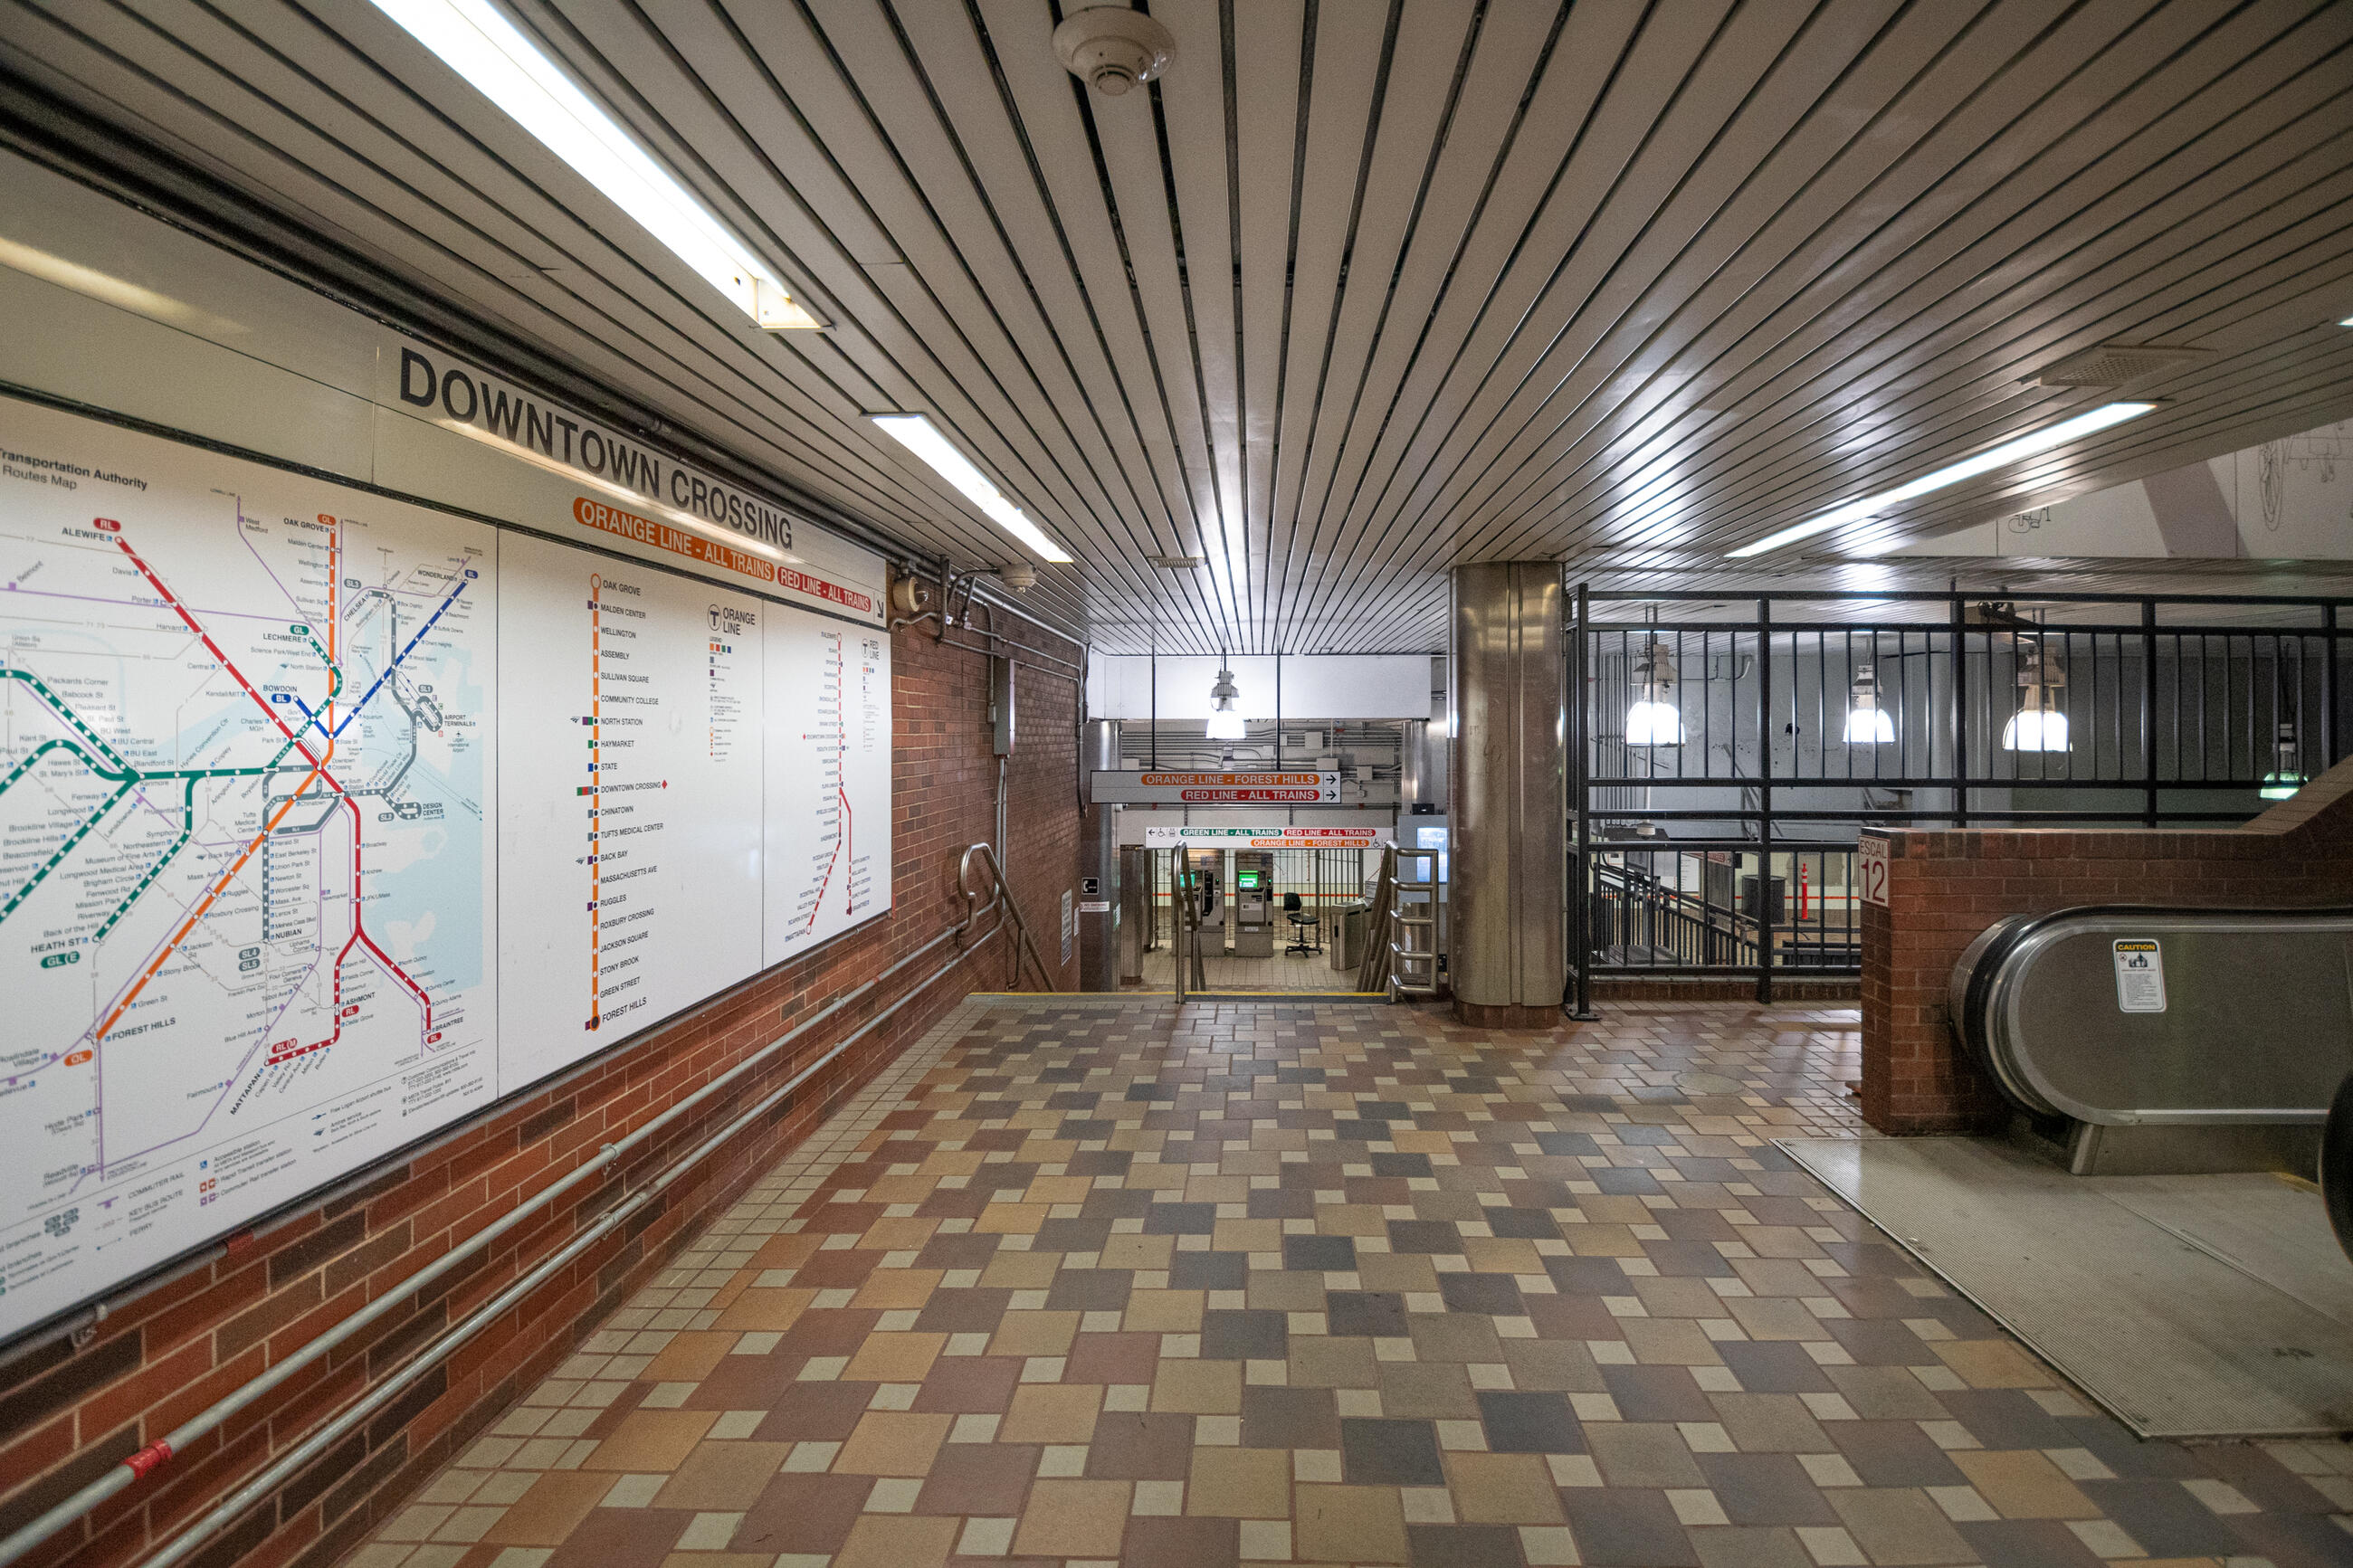 A big station map inside Downtown Crossing station. Stairs lead down to the fares and platform area